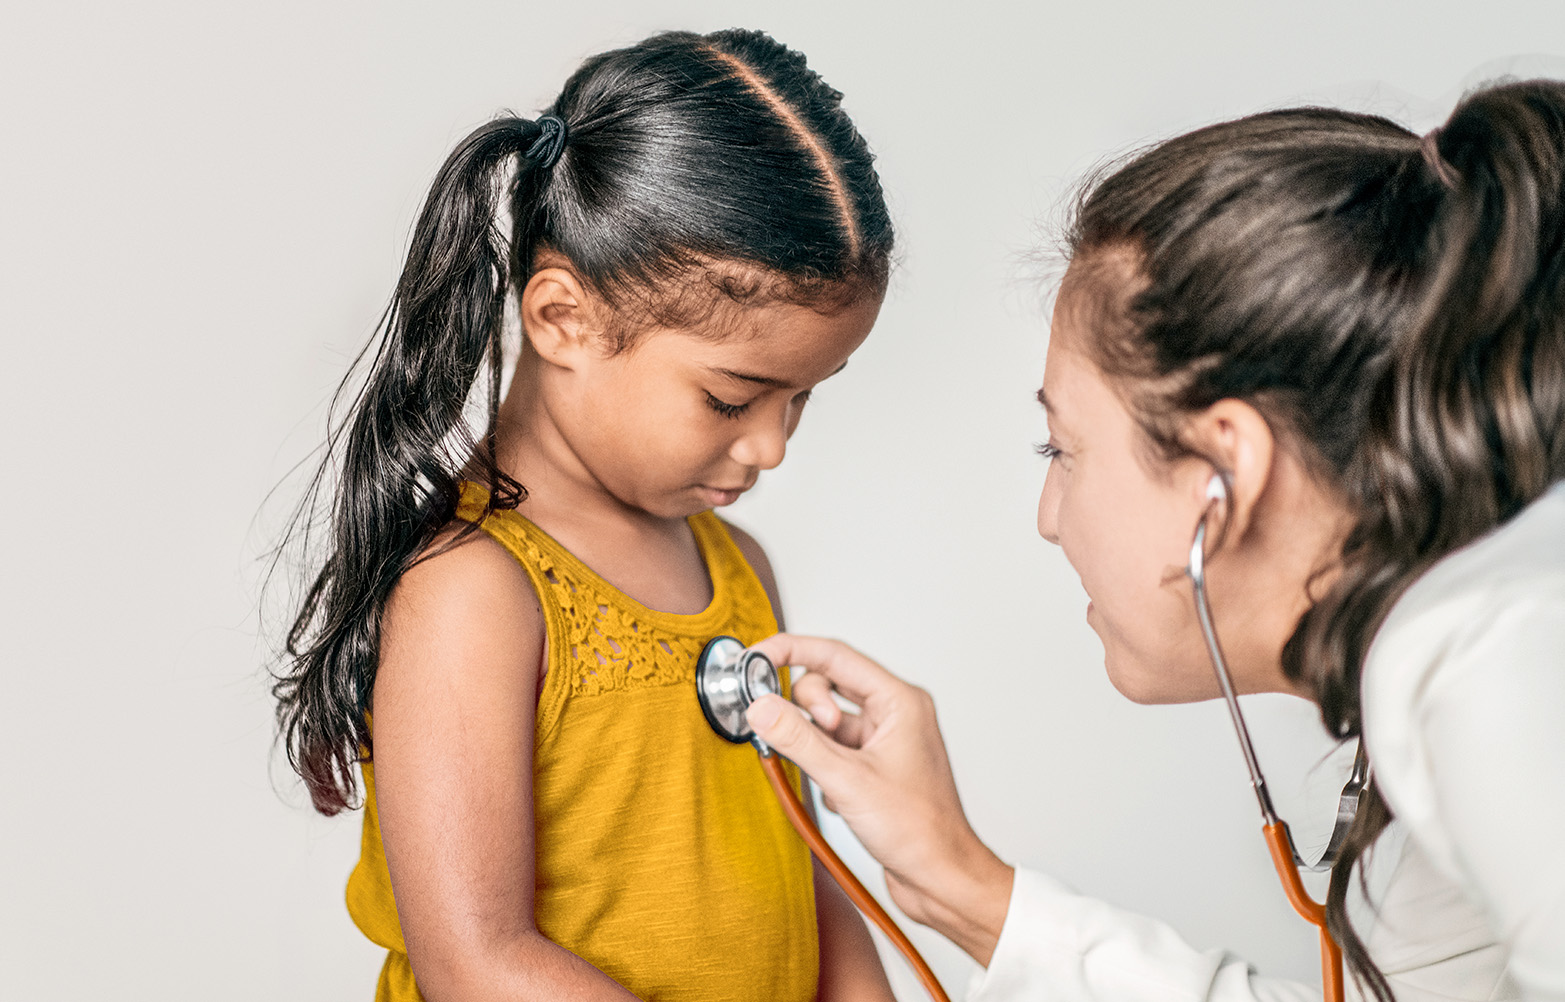 Female-presenting doctor leaning in with a stethoscope to hear a female-presenting child's heartbeat.